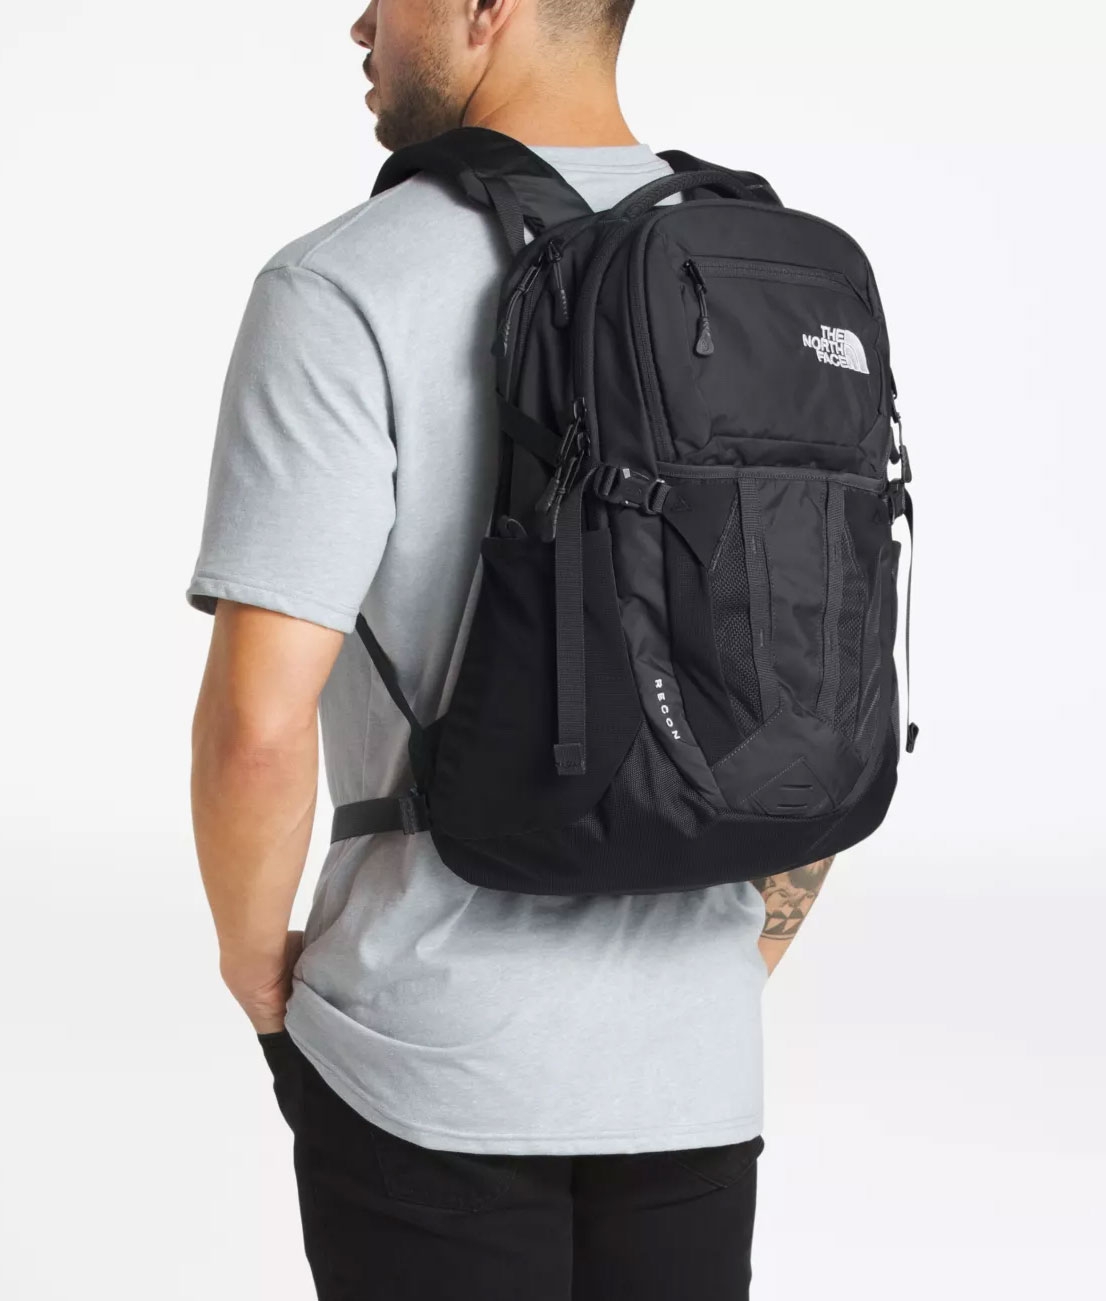 north face recon review 2019